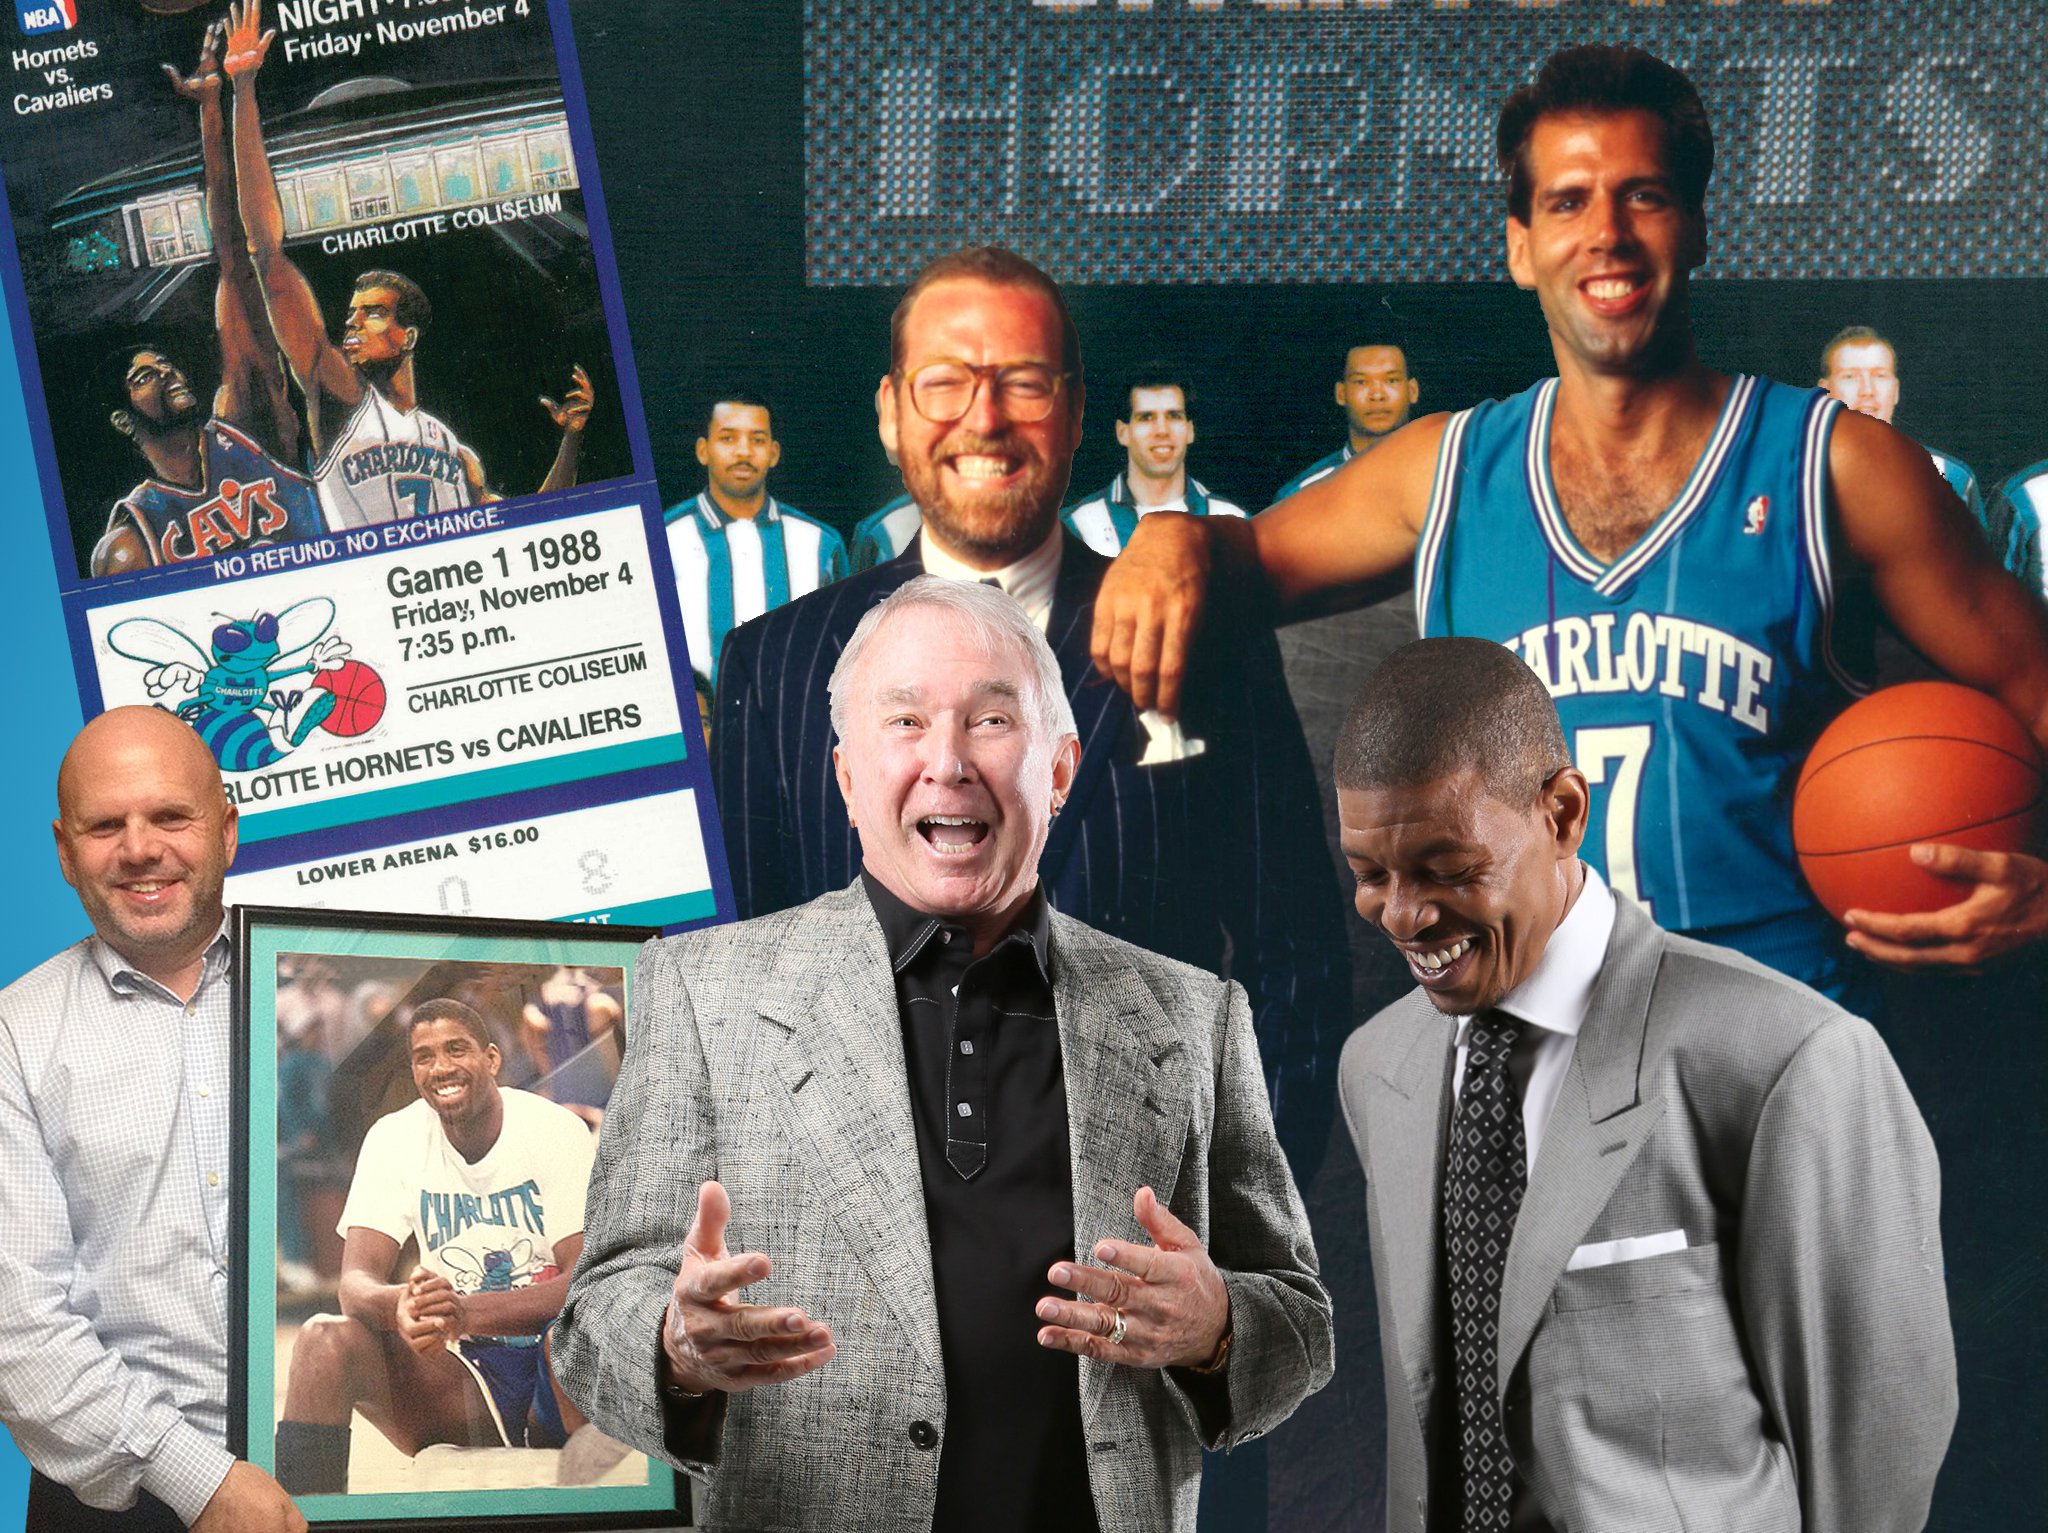 The Place Went Nuts': An Oral History of the 1988 Charlotte Hornets -  Charlotte Magazine